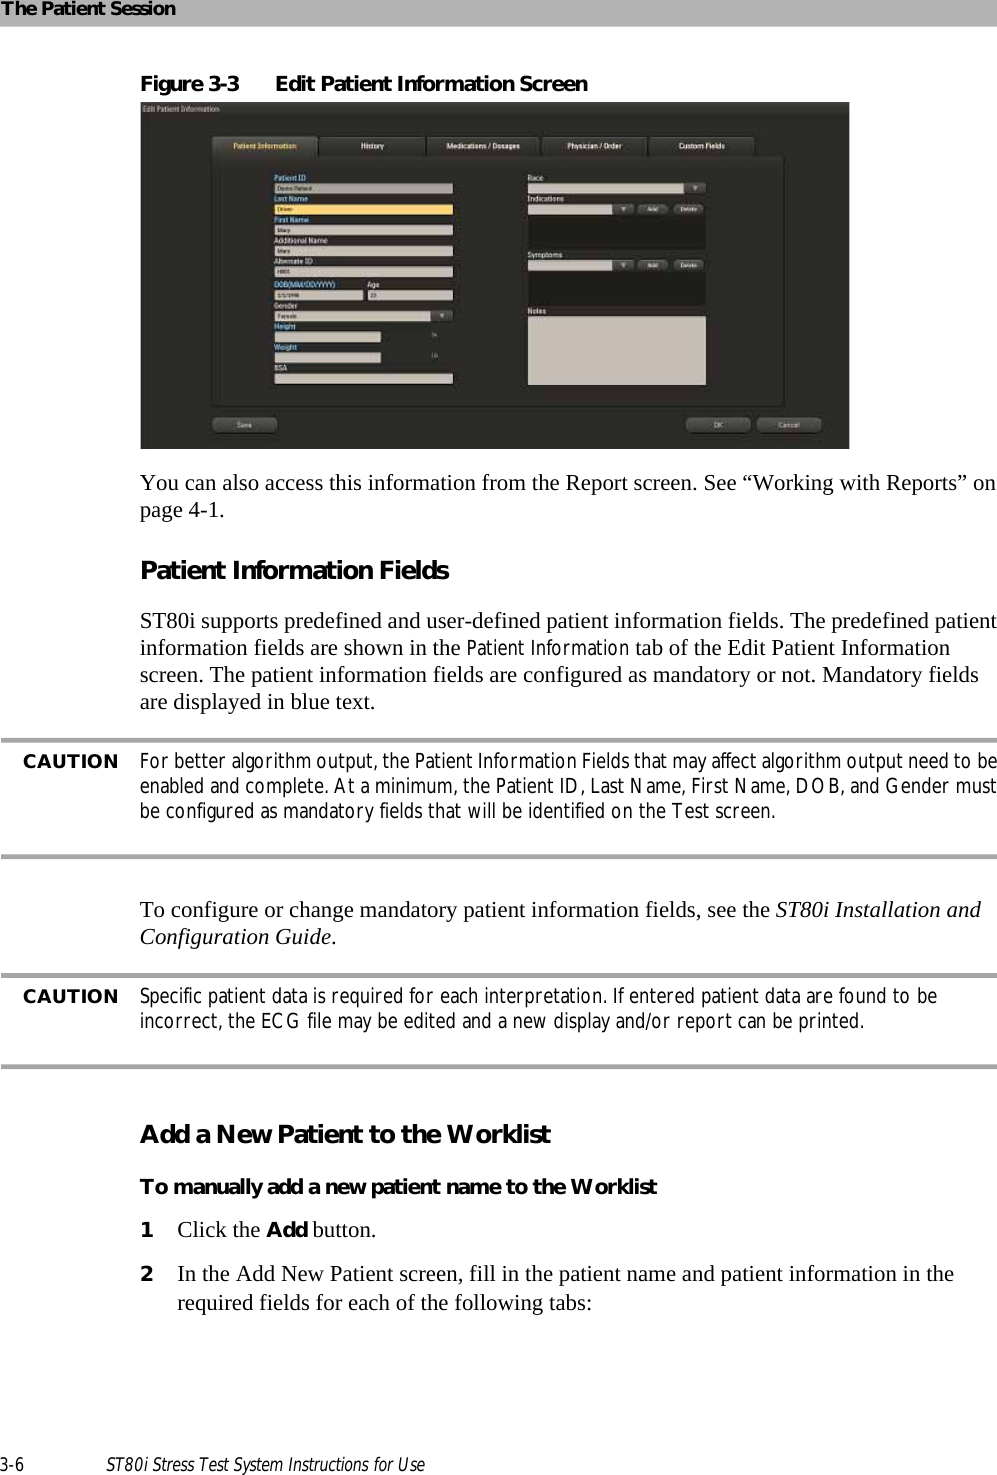 The Patient Session3-6 ST80i Stress Test System Instructions for UseFigure 3-3 Edit Patient Information ScreenYou can also access this information from the Report screen. See “Working with Reports” on page 4-1.Patient Information Fields ST80i supports predefined and user-defined patient information fields. The predefined patient information fields are shown in the Patient Information tab of the Edit Patient Information screen. The patient information fields are configured as mandatory or not. Mandatory fields are displayed in blue text. CAUTION For better algorithm output, the Patient Information Fields that may affect algorithm output need to be enabled and complete. At a minimum, the Patient ID, Last Name, First Name, DOB, and Gender must be configured as mandatory fields that will be identified on the Test screen. To configure or change mandatory patient information fields, see the ST80i Installation and Configuration Guide. CAUTION Specific patient data is required for each interpretation. If entered patient data are found to be incorrect, the ECG file may be edited and a new display and/or report can be printed. Add a New Patient to the WorklistTo manually add a new patient name to the Worklist1Click the Add button.2In the Add New Patient screen, fill in the patient name and patient information in the required fields for each of the following tabs: